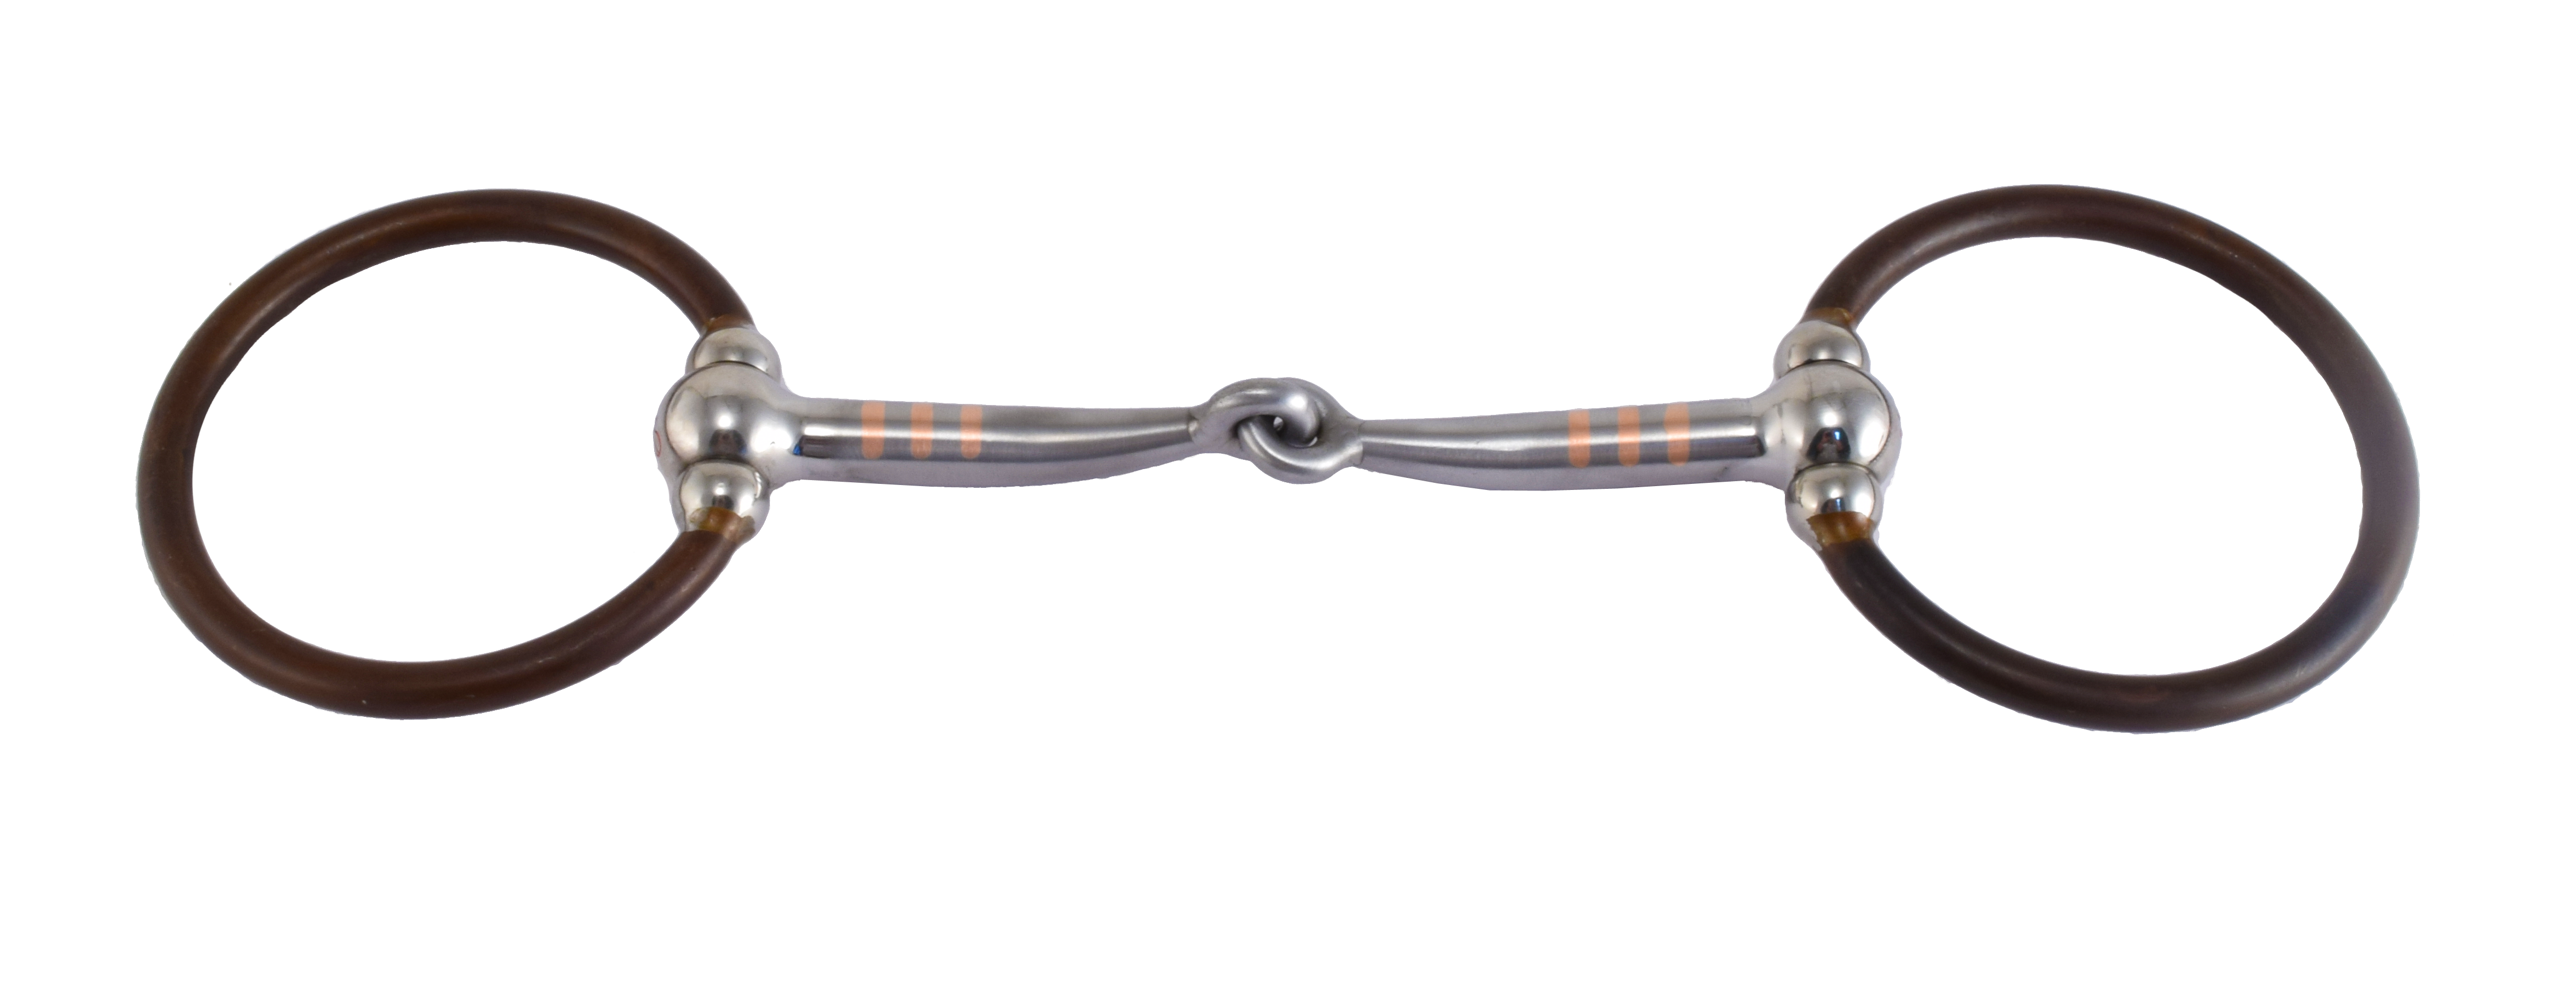 Showman Nickel Plated O-Ring Snaffle Bit! New Horse TACK! : Amazon.in:  Jewellery